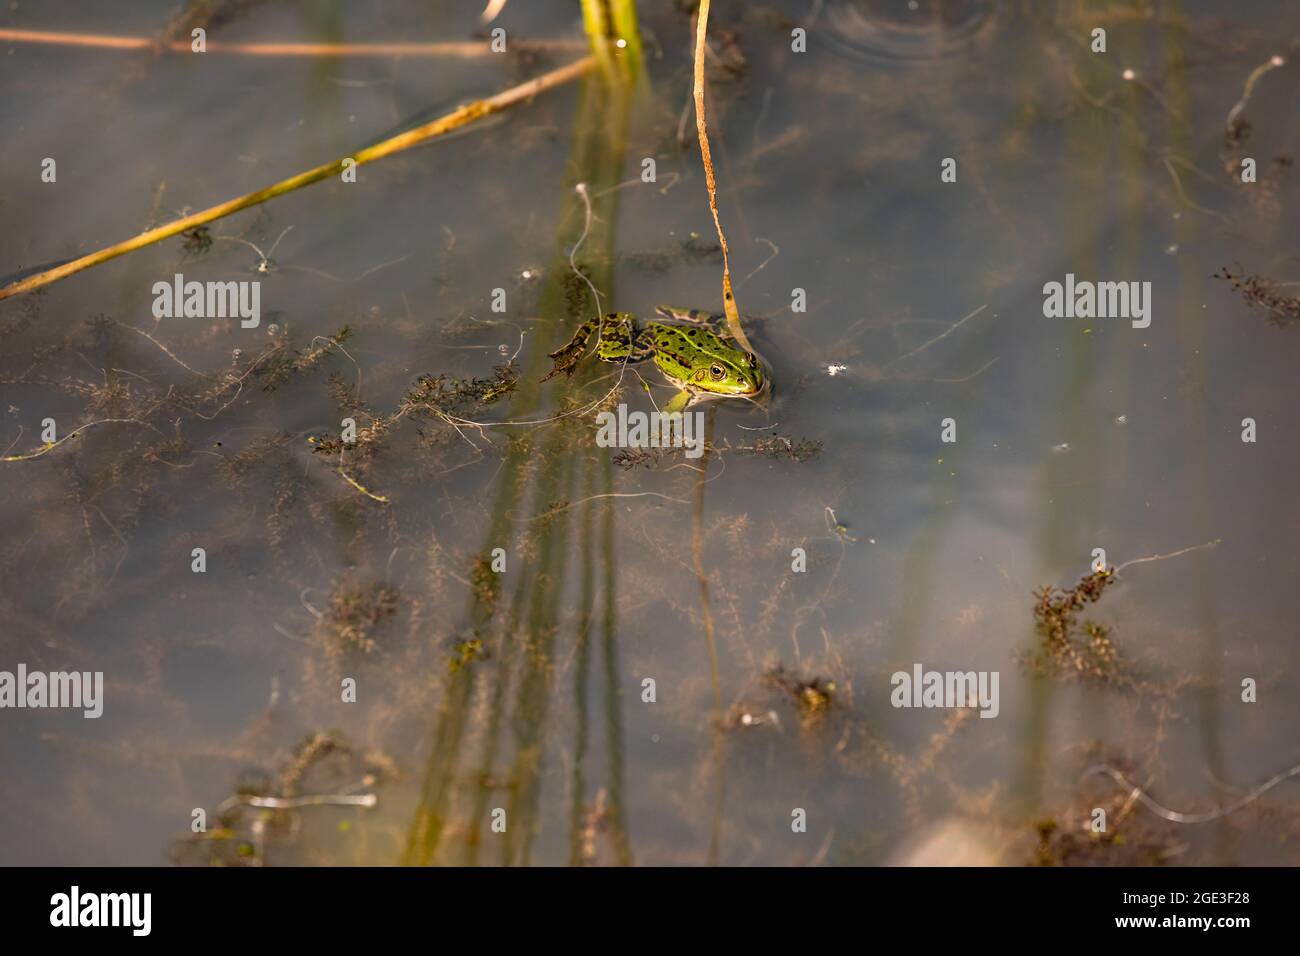 A striking pond frog waits for possible prey in shallow water Stock Photo